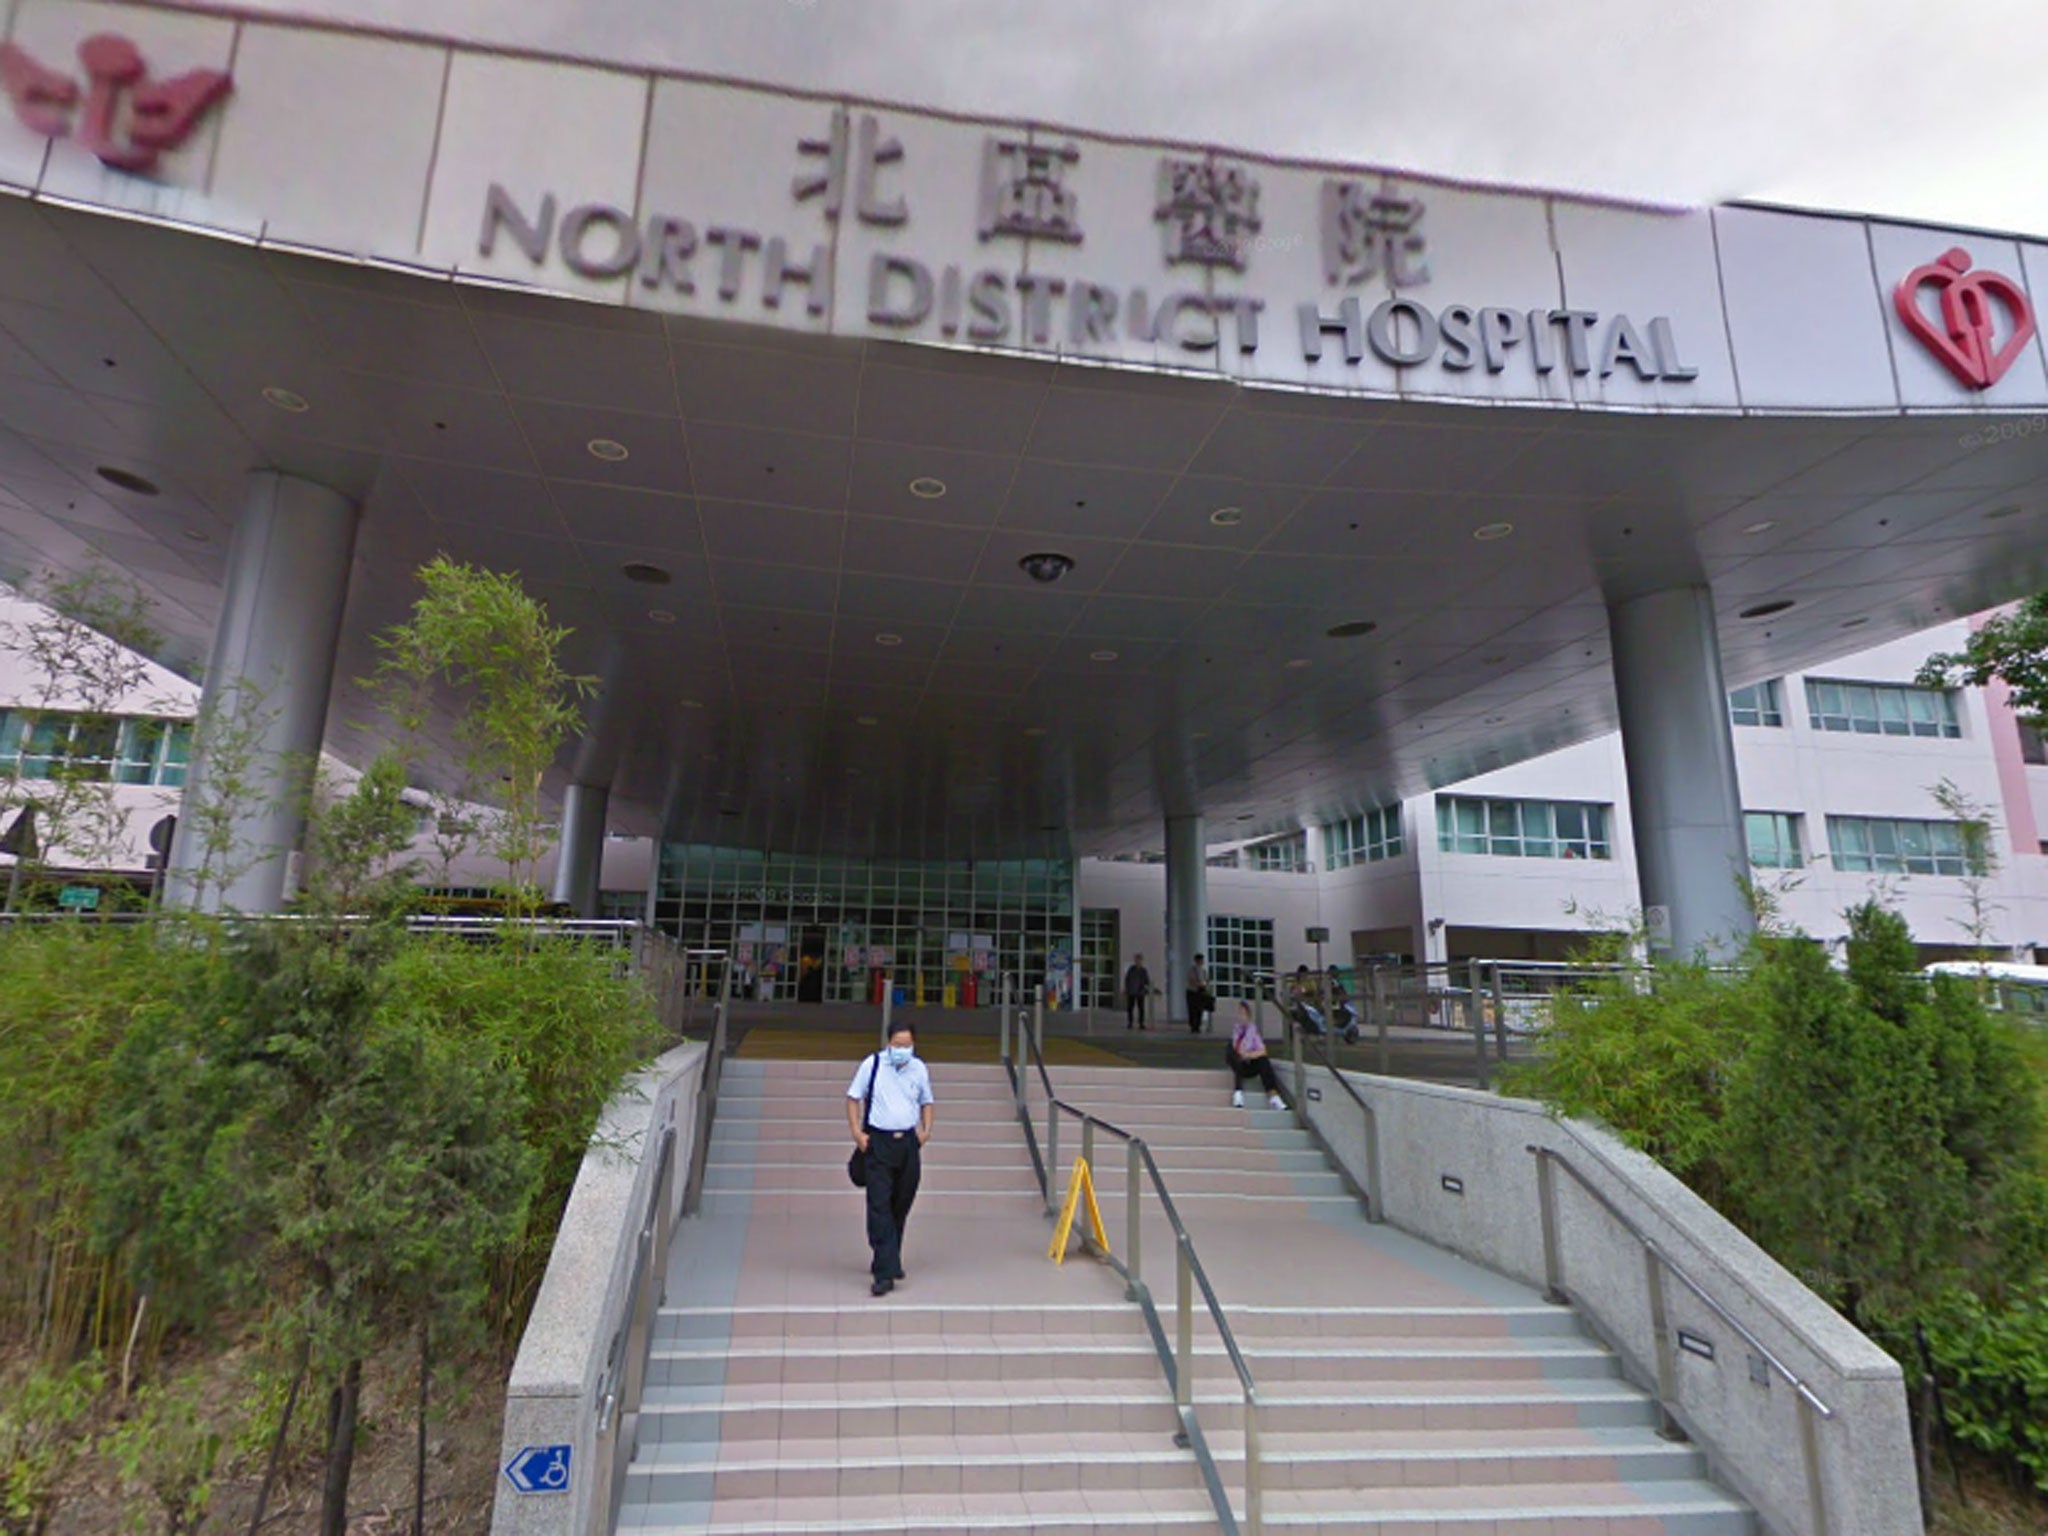 The North District Hospital on Clinic Road, Hong Kong, where the victim was attacked by two men